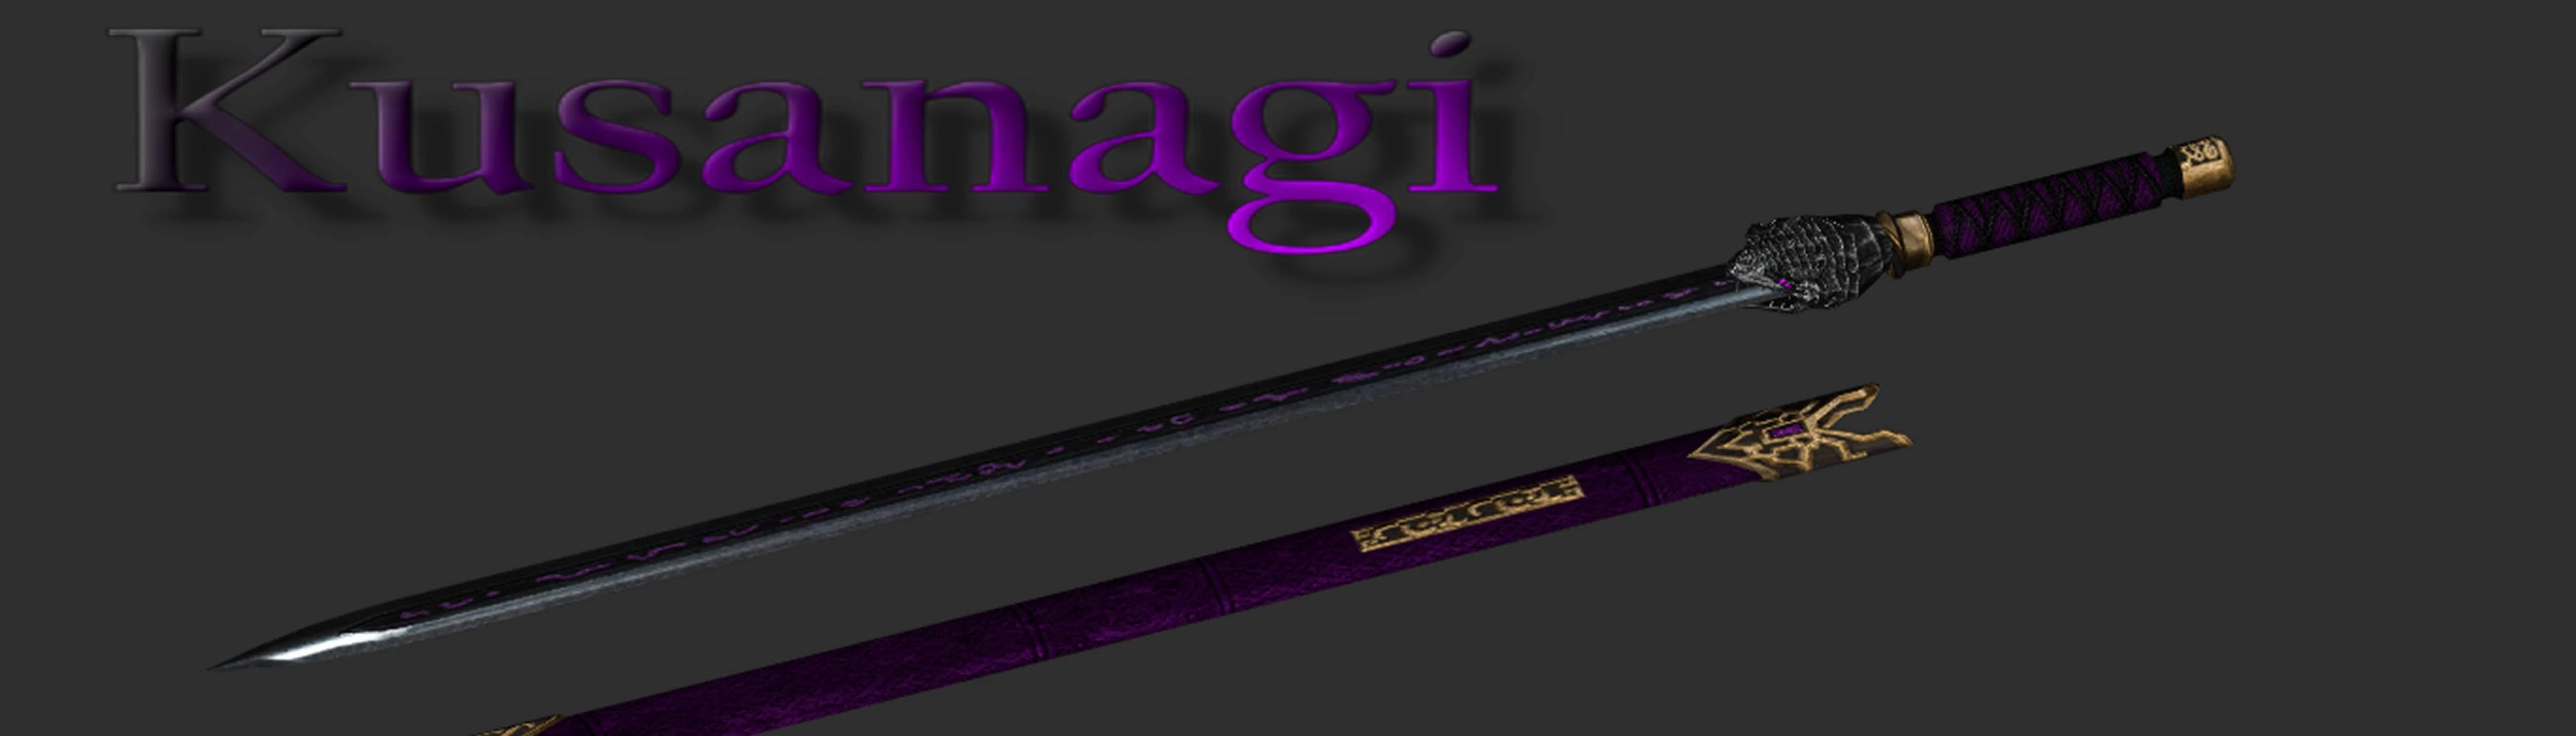 The katana in this game is cool, i like the design with all the mods, wish  i could make look more like the Murasama from MGR, would be cool to have a